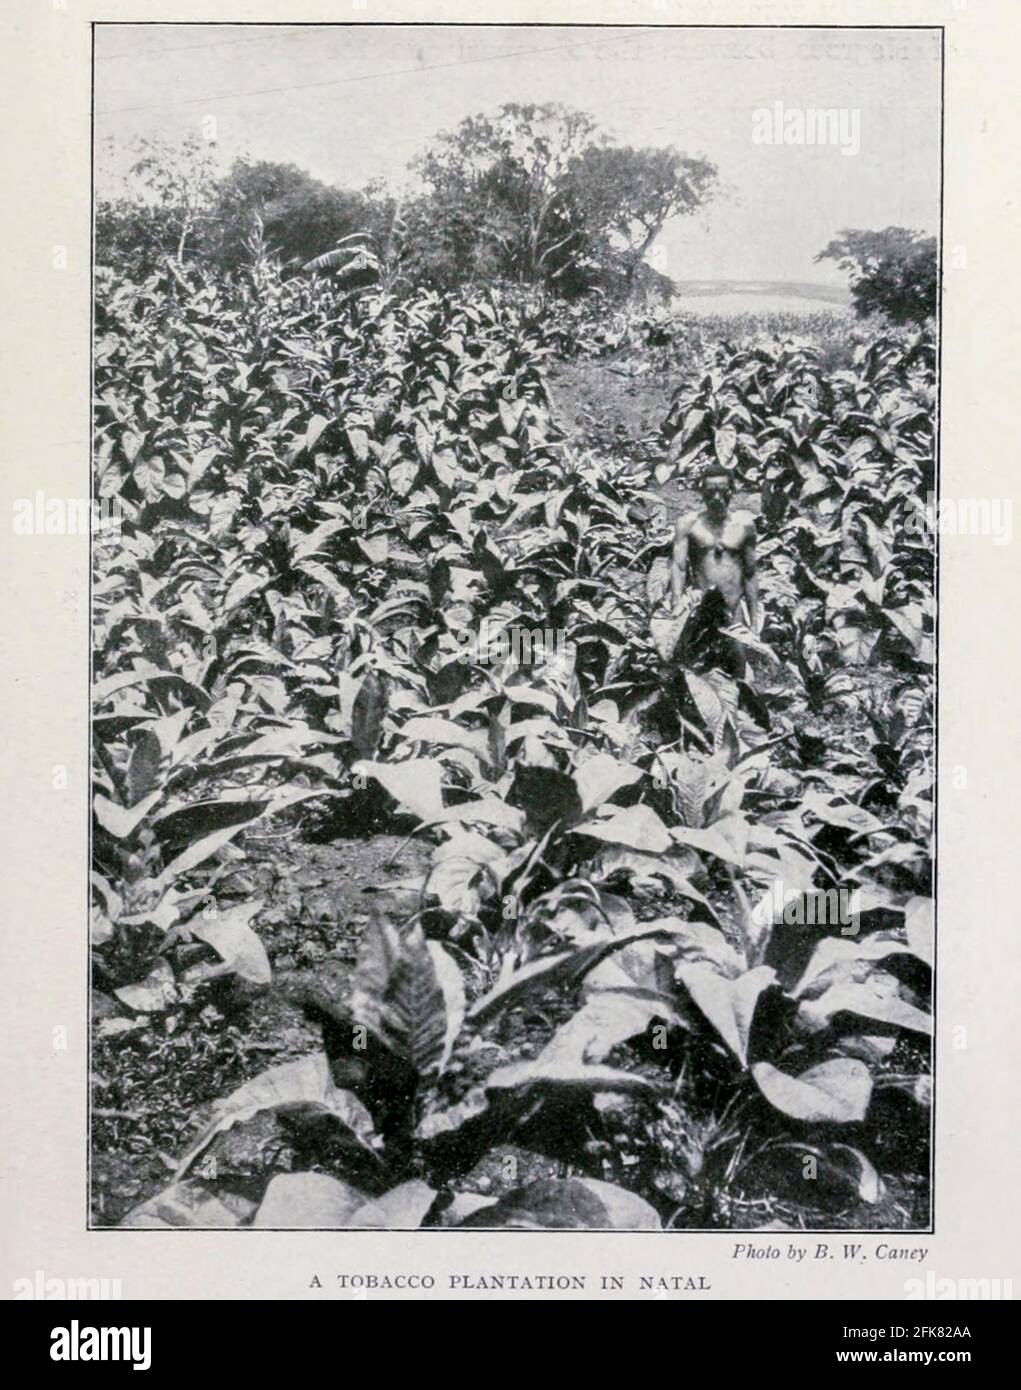 A Tobacco Plantation in Natal from the Book 'Britain across the Seas : Africa : A history and description of the British Empire in Africa' von Johnston, Harry Hamilton, Sir, 1858-1927 Veröffentlicht 1910 in London von National Society's Depository Stockfoto